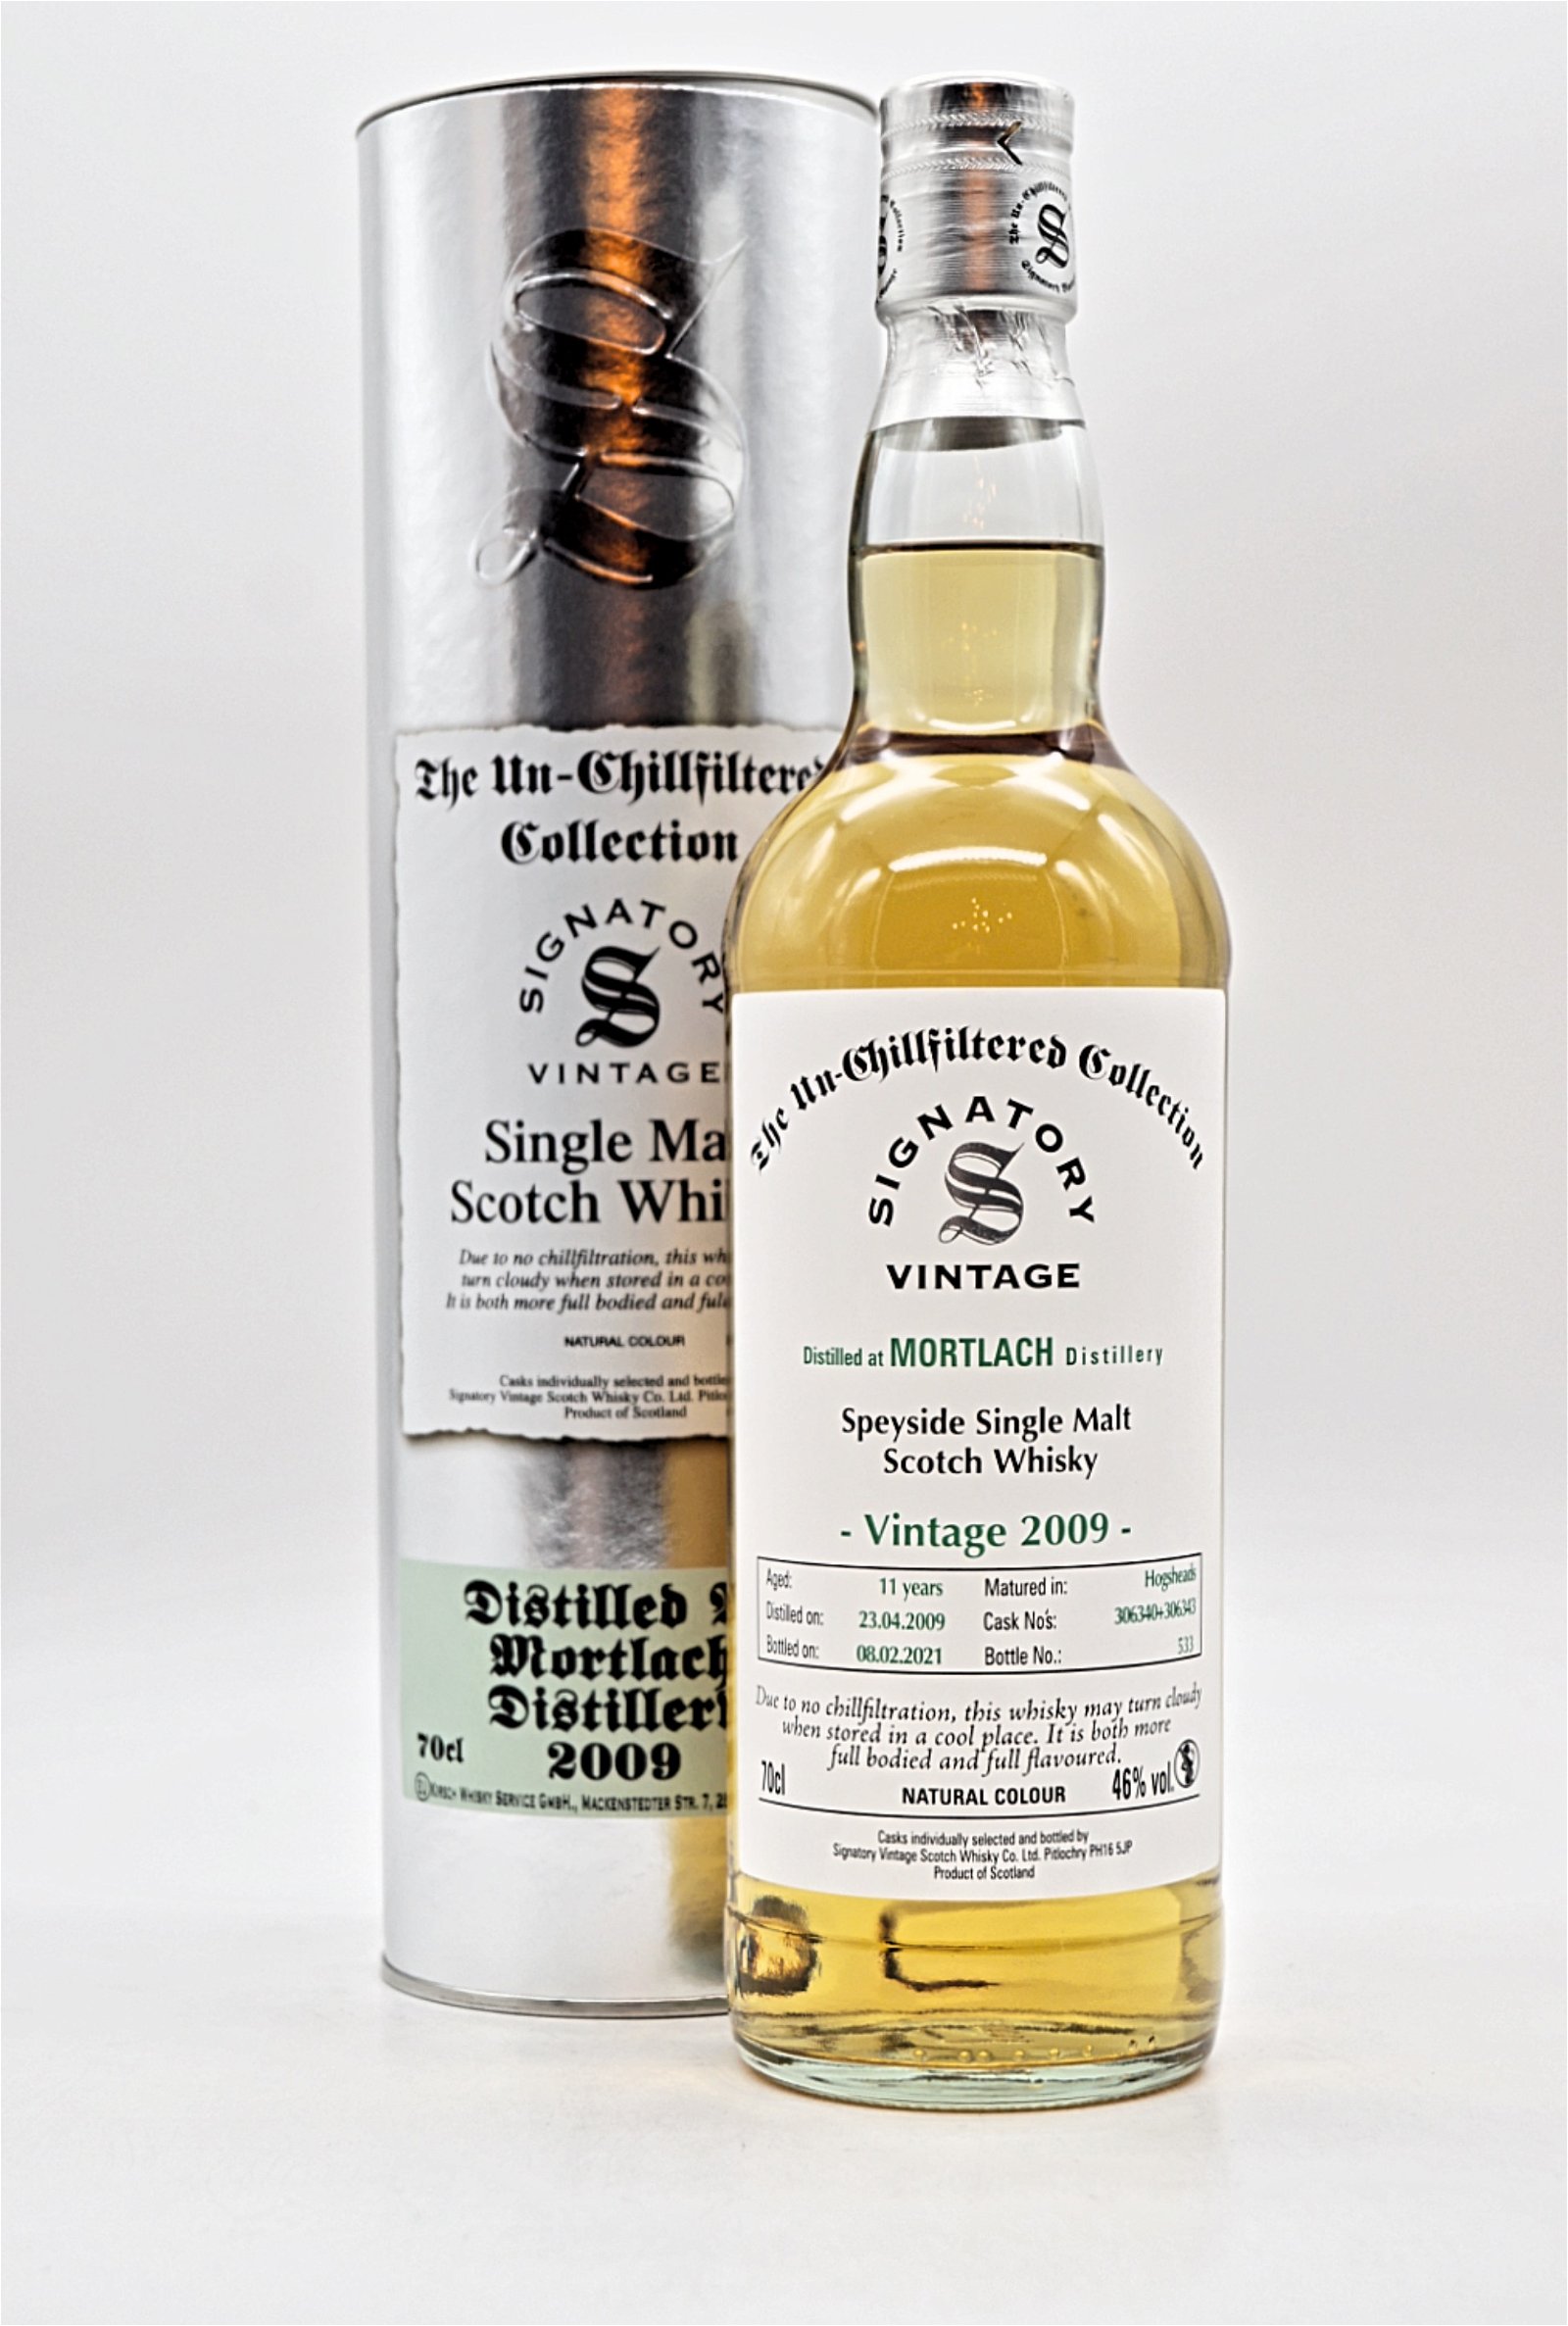 Signatory Vintage The Un-Chillfiltered Collection 11 Jahre Mortlach Vintage 2009 Speyside Single Malt Scotch Whisky